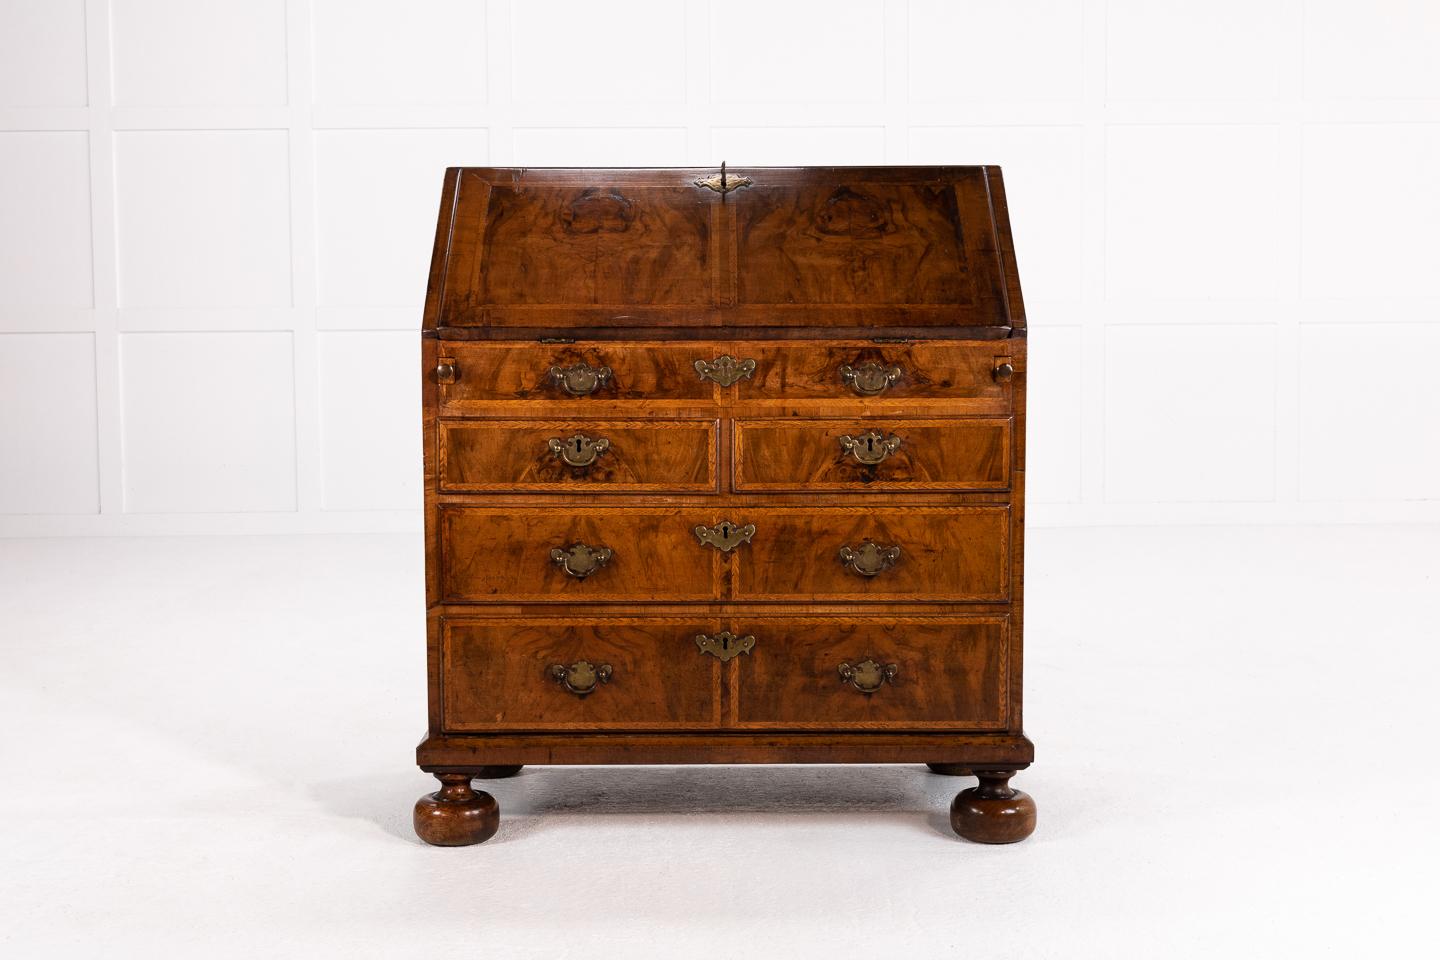 Nice, small proportioned early 18th century Queen Anne walnut bureau with lovely interior.